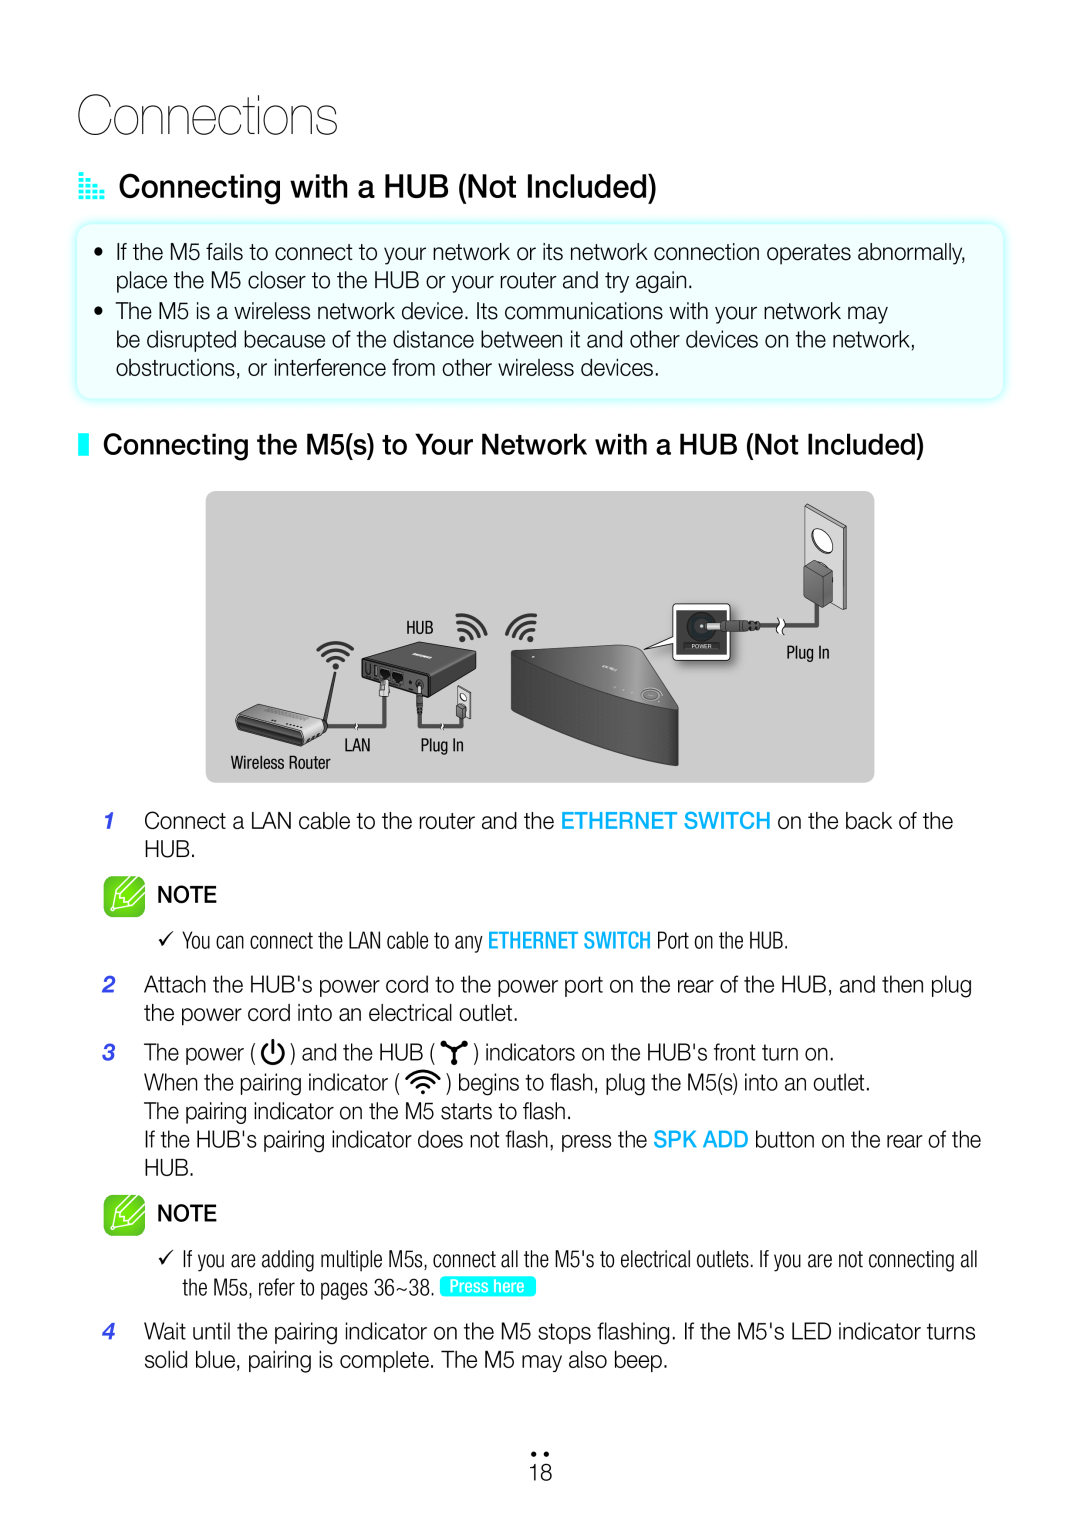 Samsung Connections, AA Connecting with a HUB Not Included, Connecting the M5s to Your Network with a HUB Not Included 